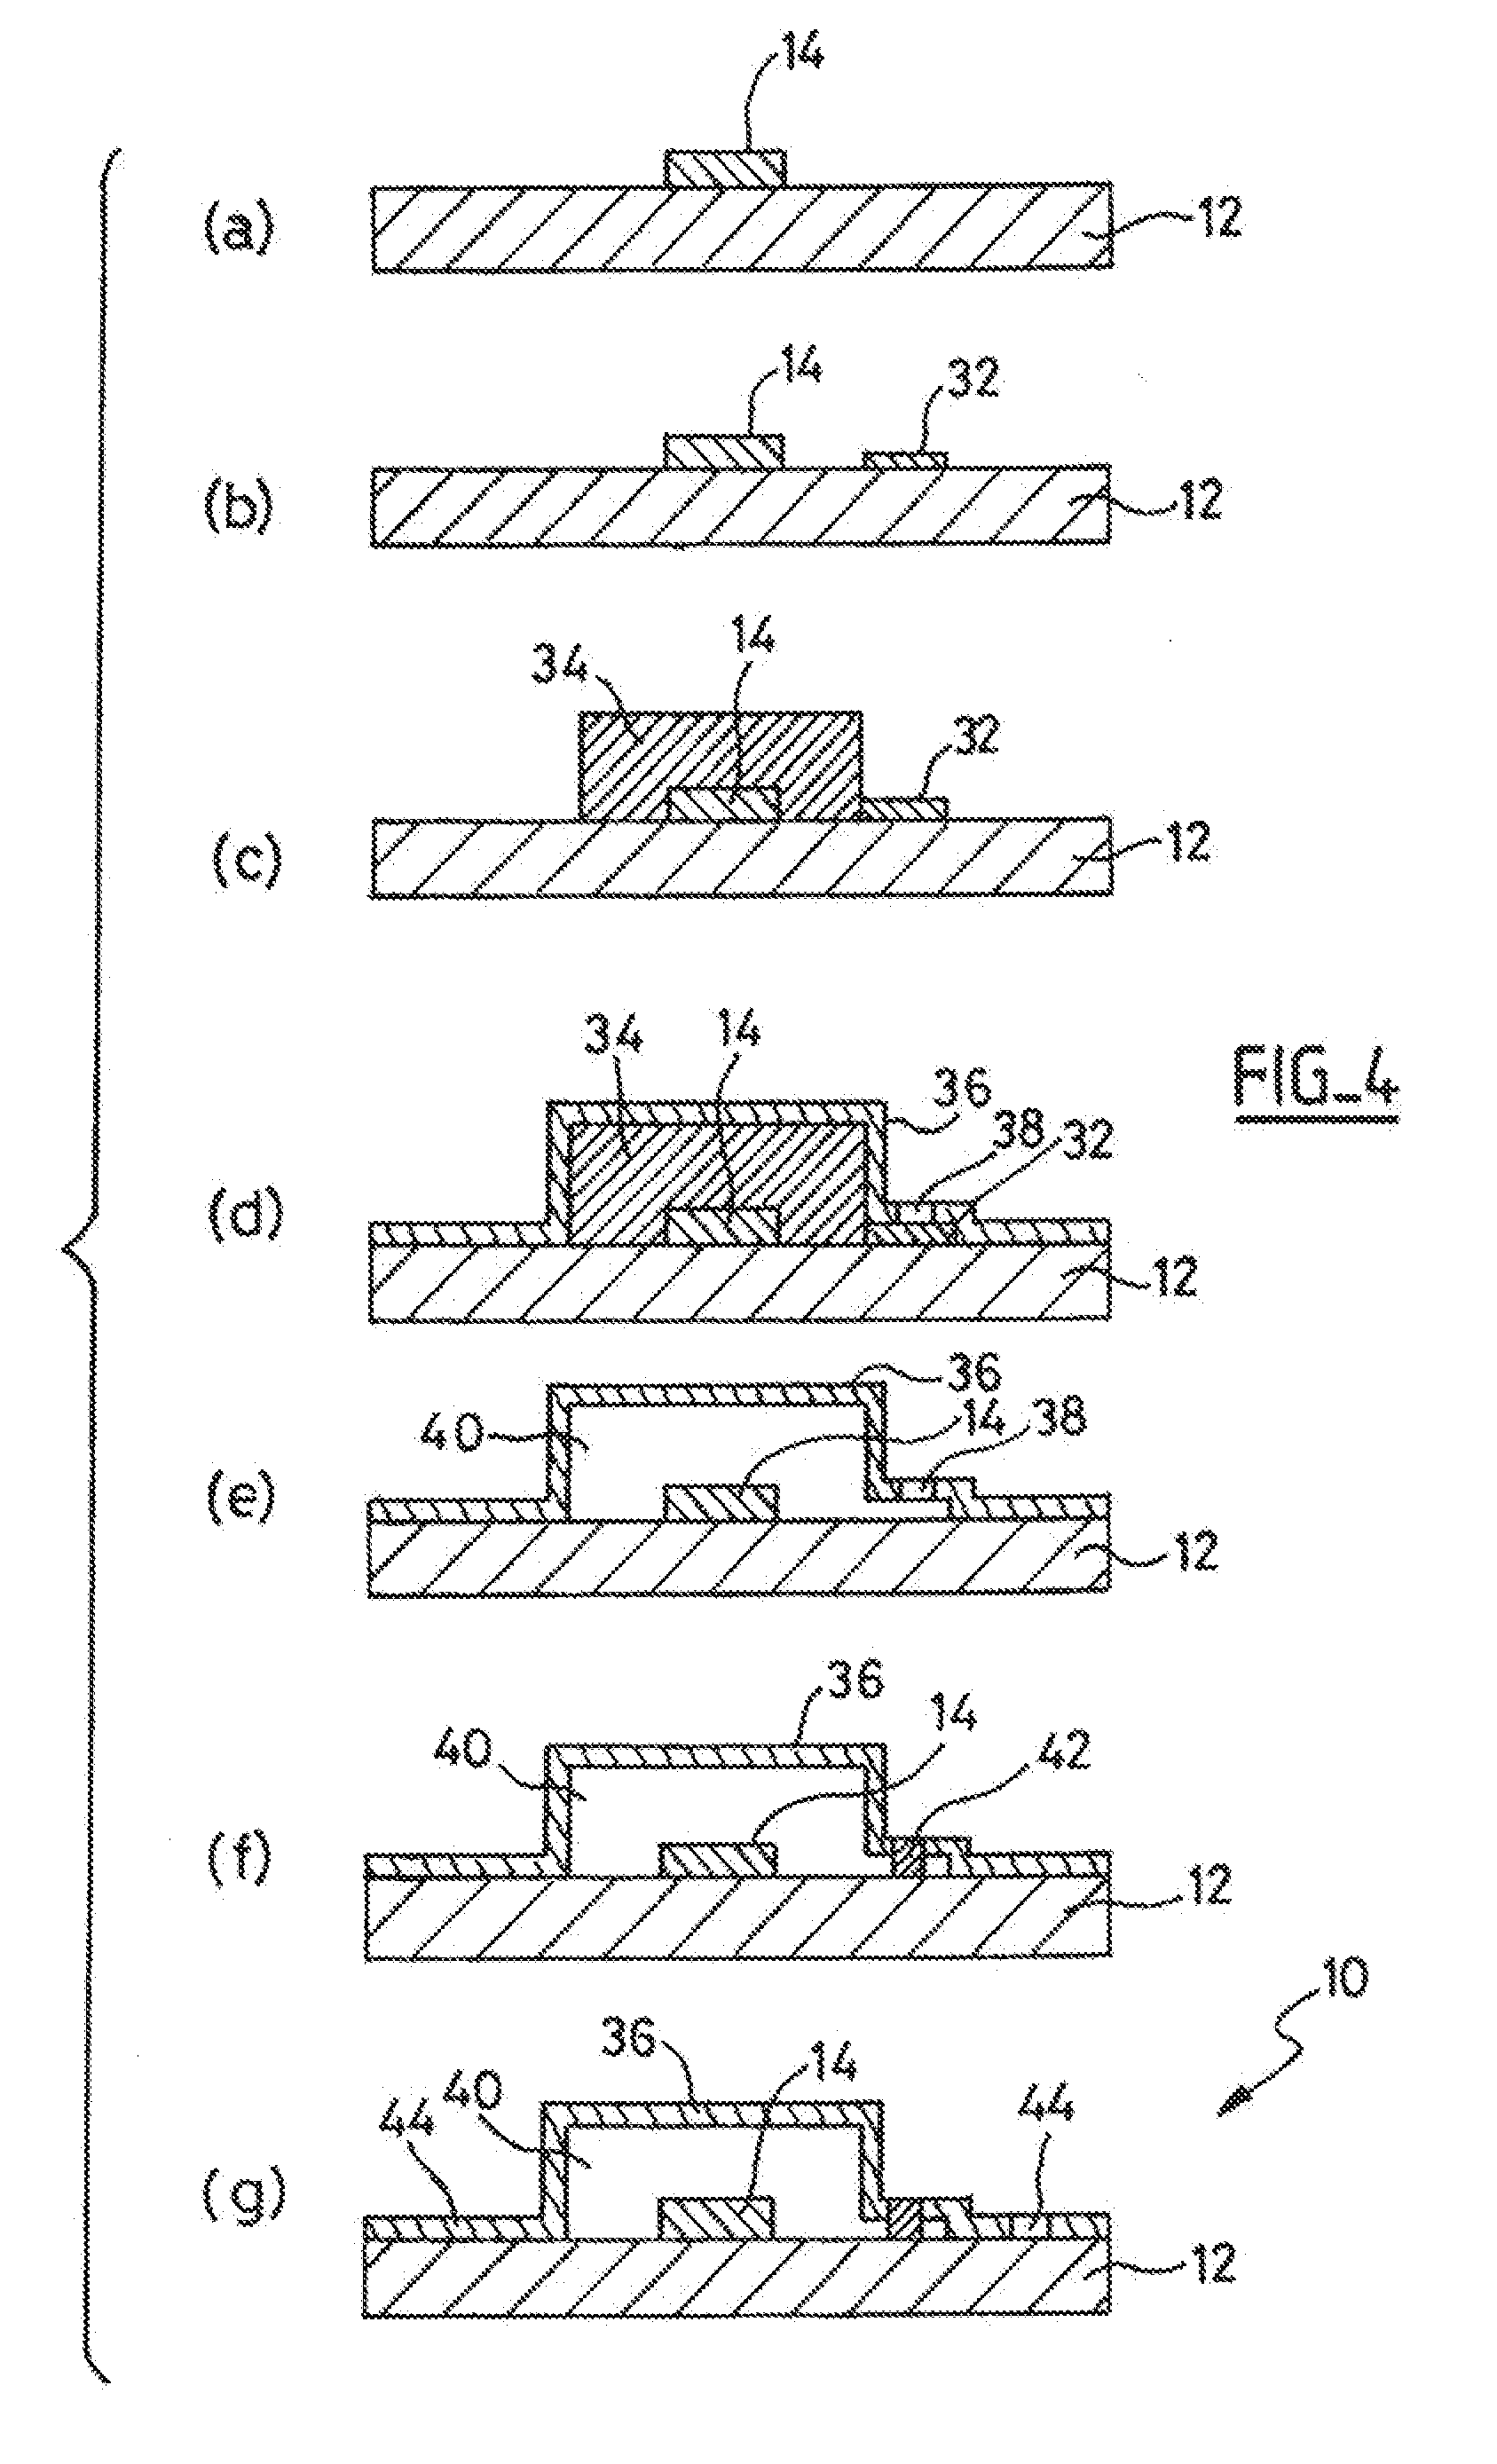 Implantable biocompatible component integrating an active sensor for measurement of a physiological parameter, a micro-electromechanical system or an integrated circuit